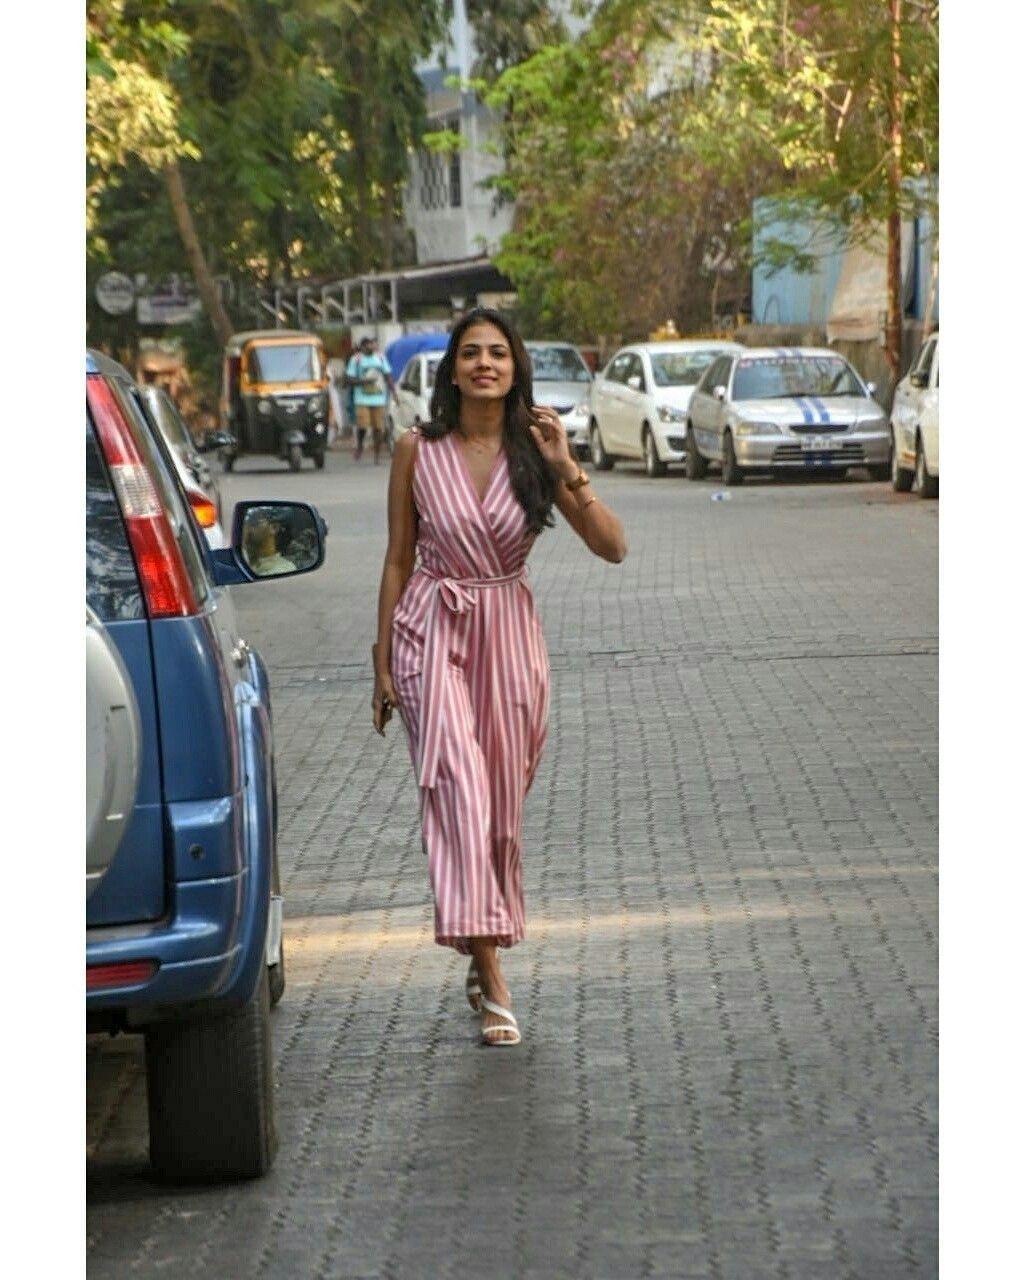 Malavika Mohanan spotted in streets of Chennai